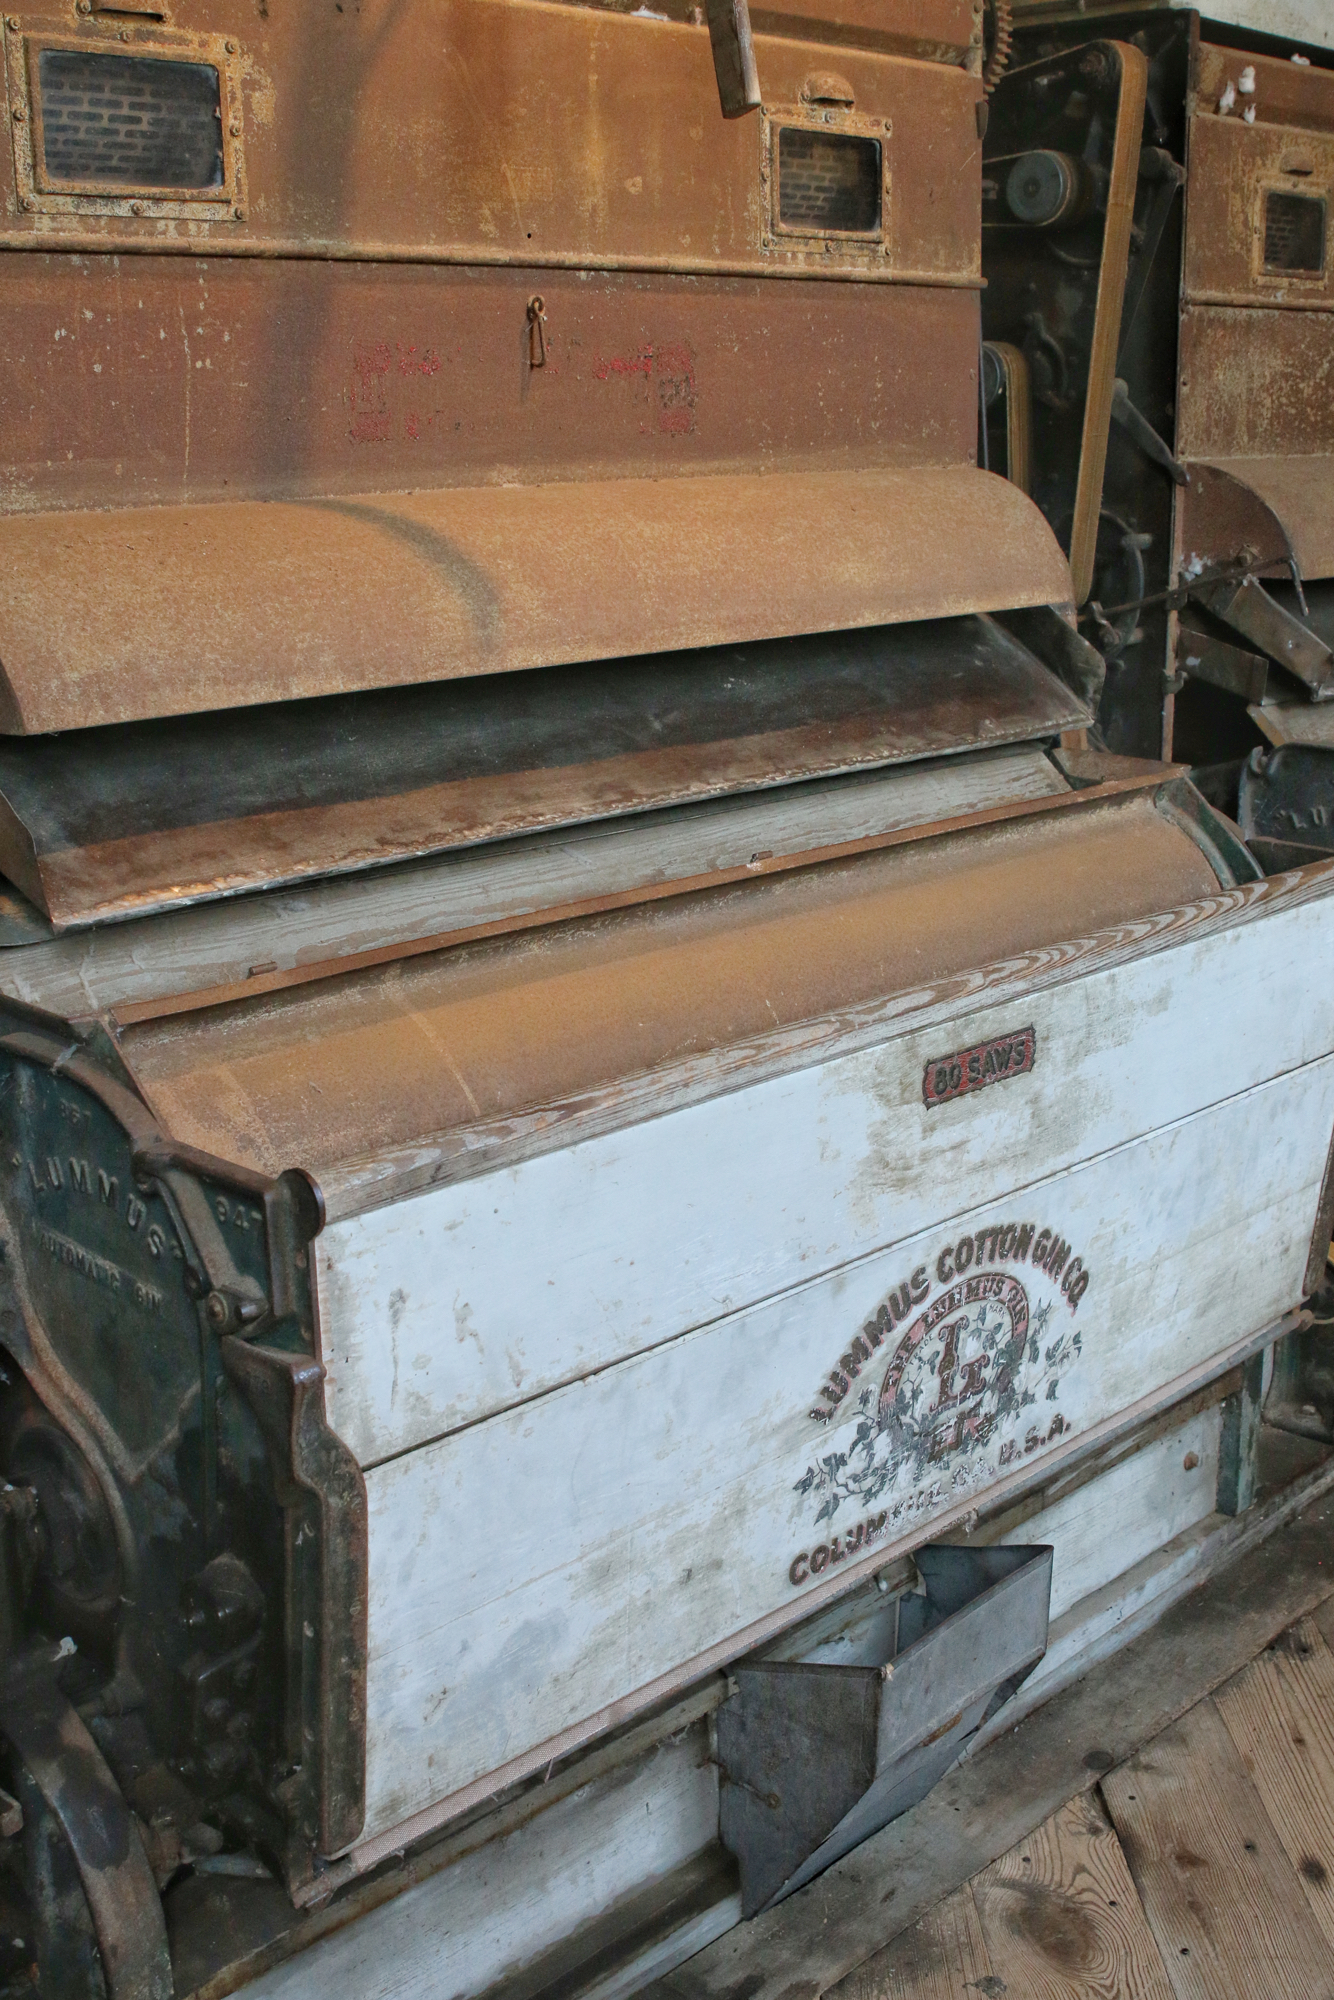 see how the cotton gin process works